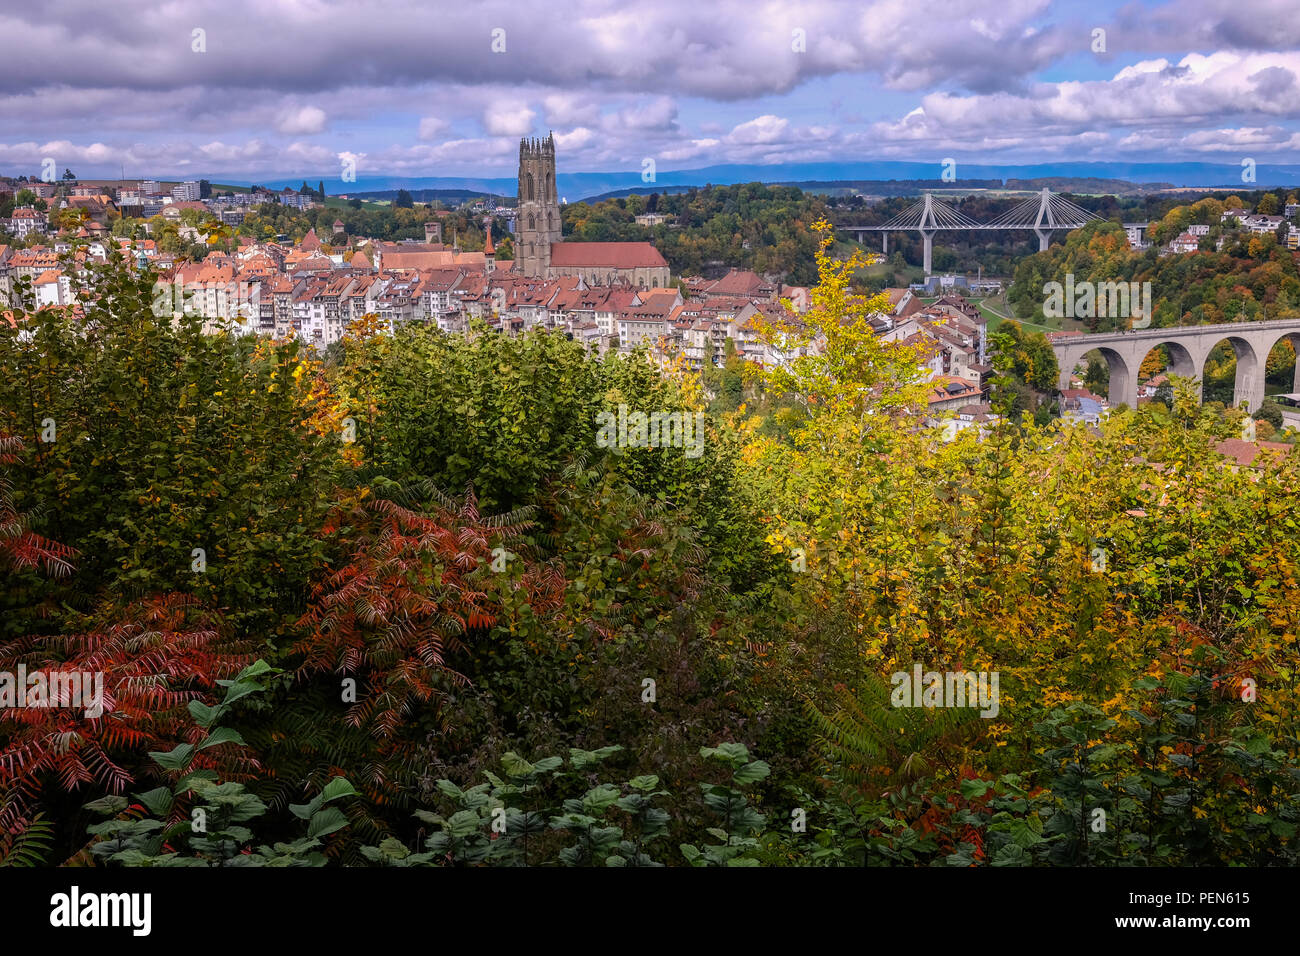 Panoramic view of the city of Fribourg, Switzerland, with the Saint-Nicolas cathedral in the center and autumnal trees in the foregound Stock Photo